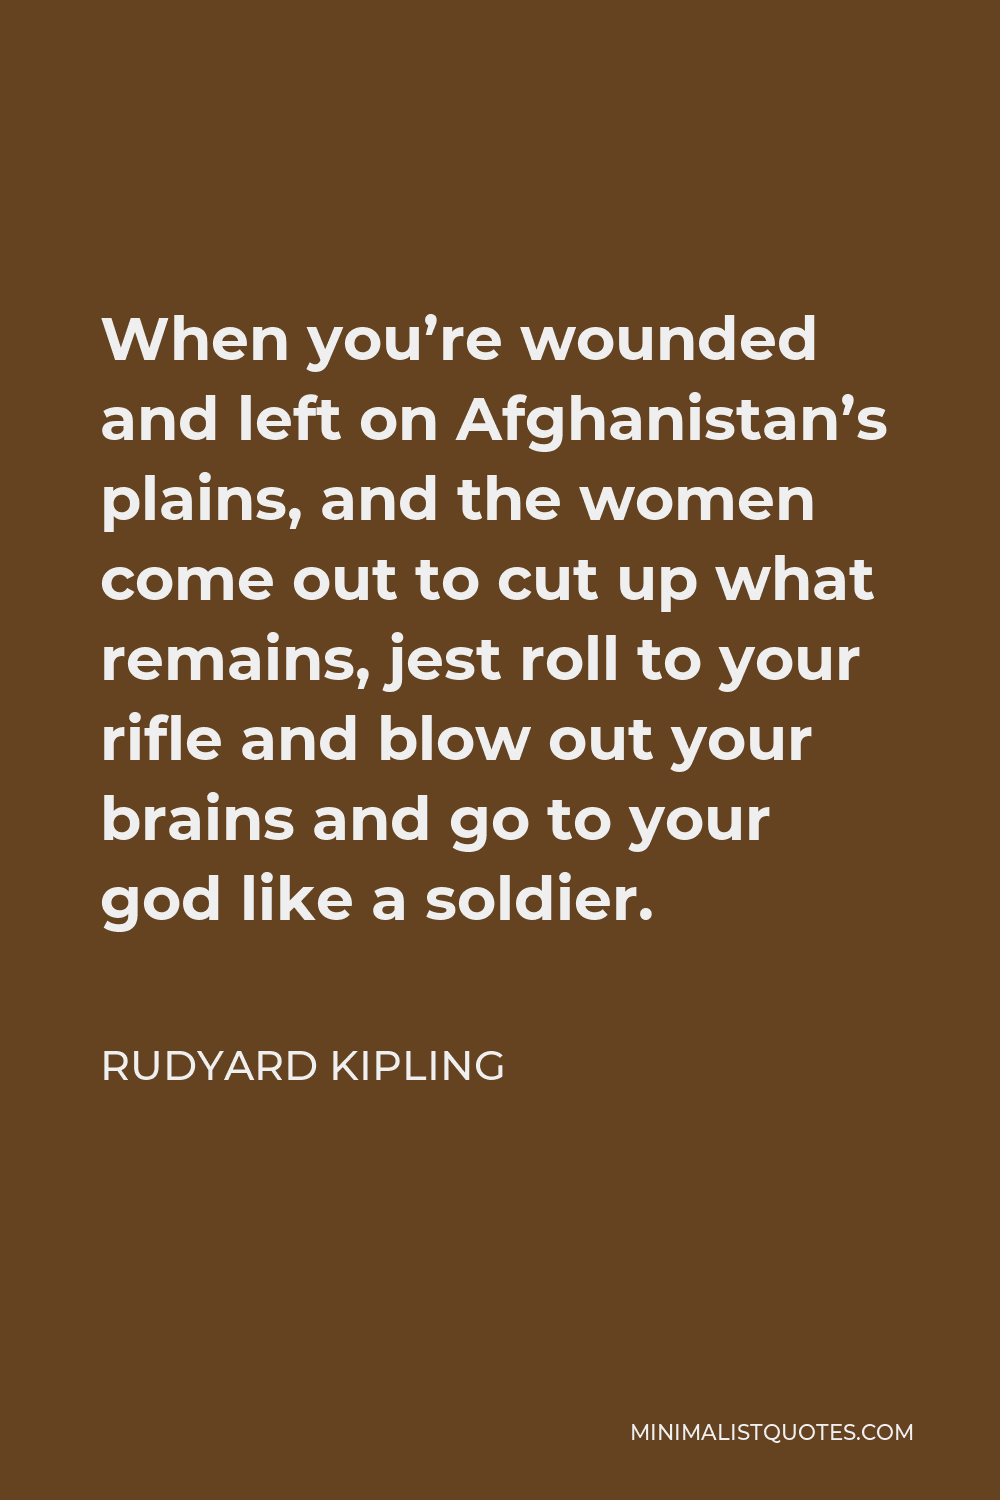 Rudyard Kipling Quote - When you’re wounded and left on Afghanistan’s plains, and the women come out to cut up what remains, jest roll to your rifle and blow out your brains and go to your god like a soldier.